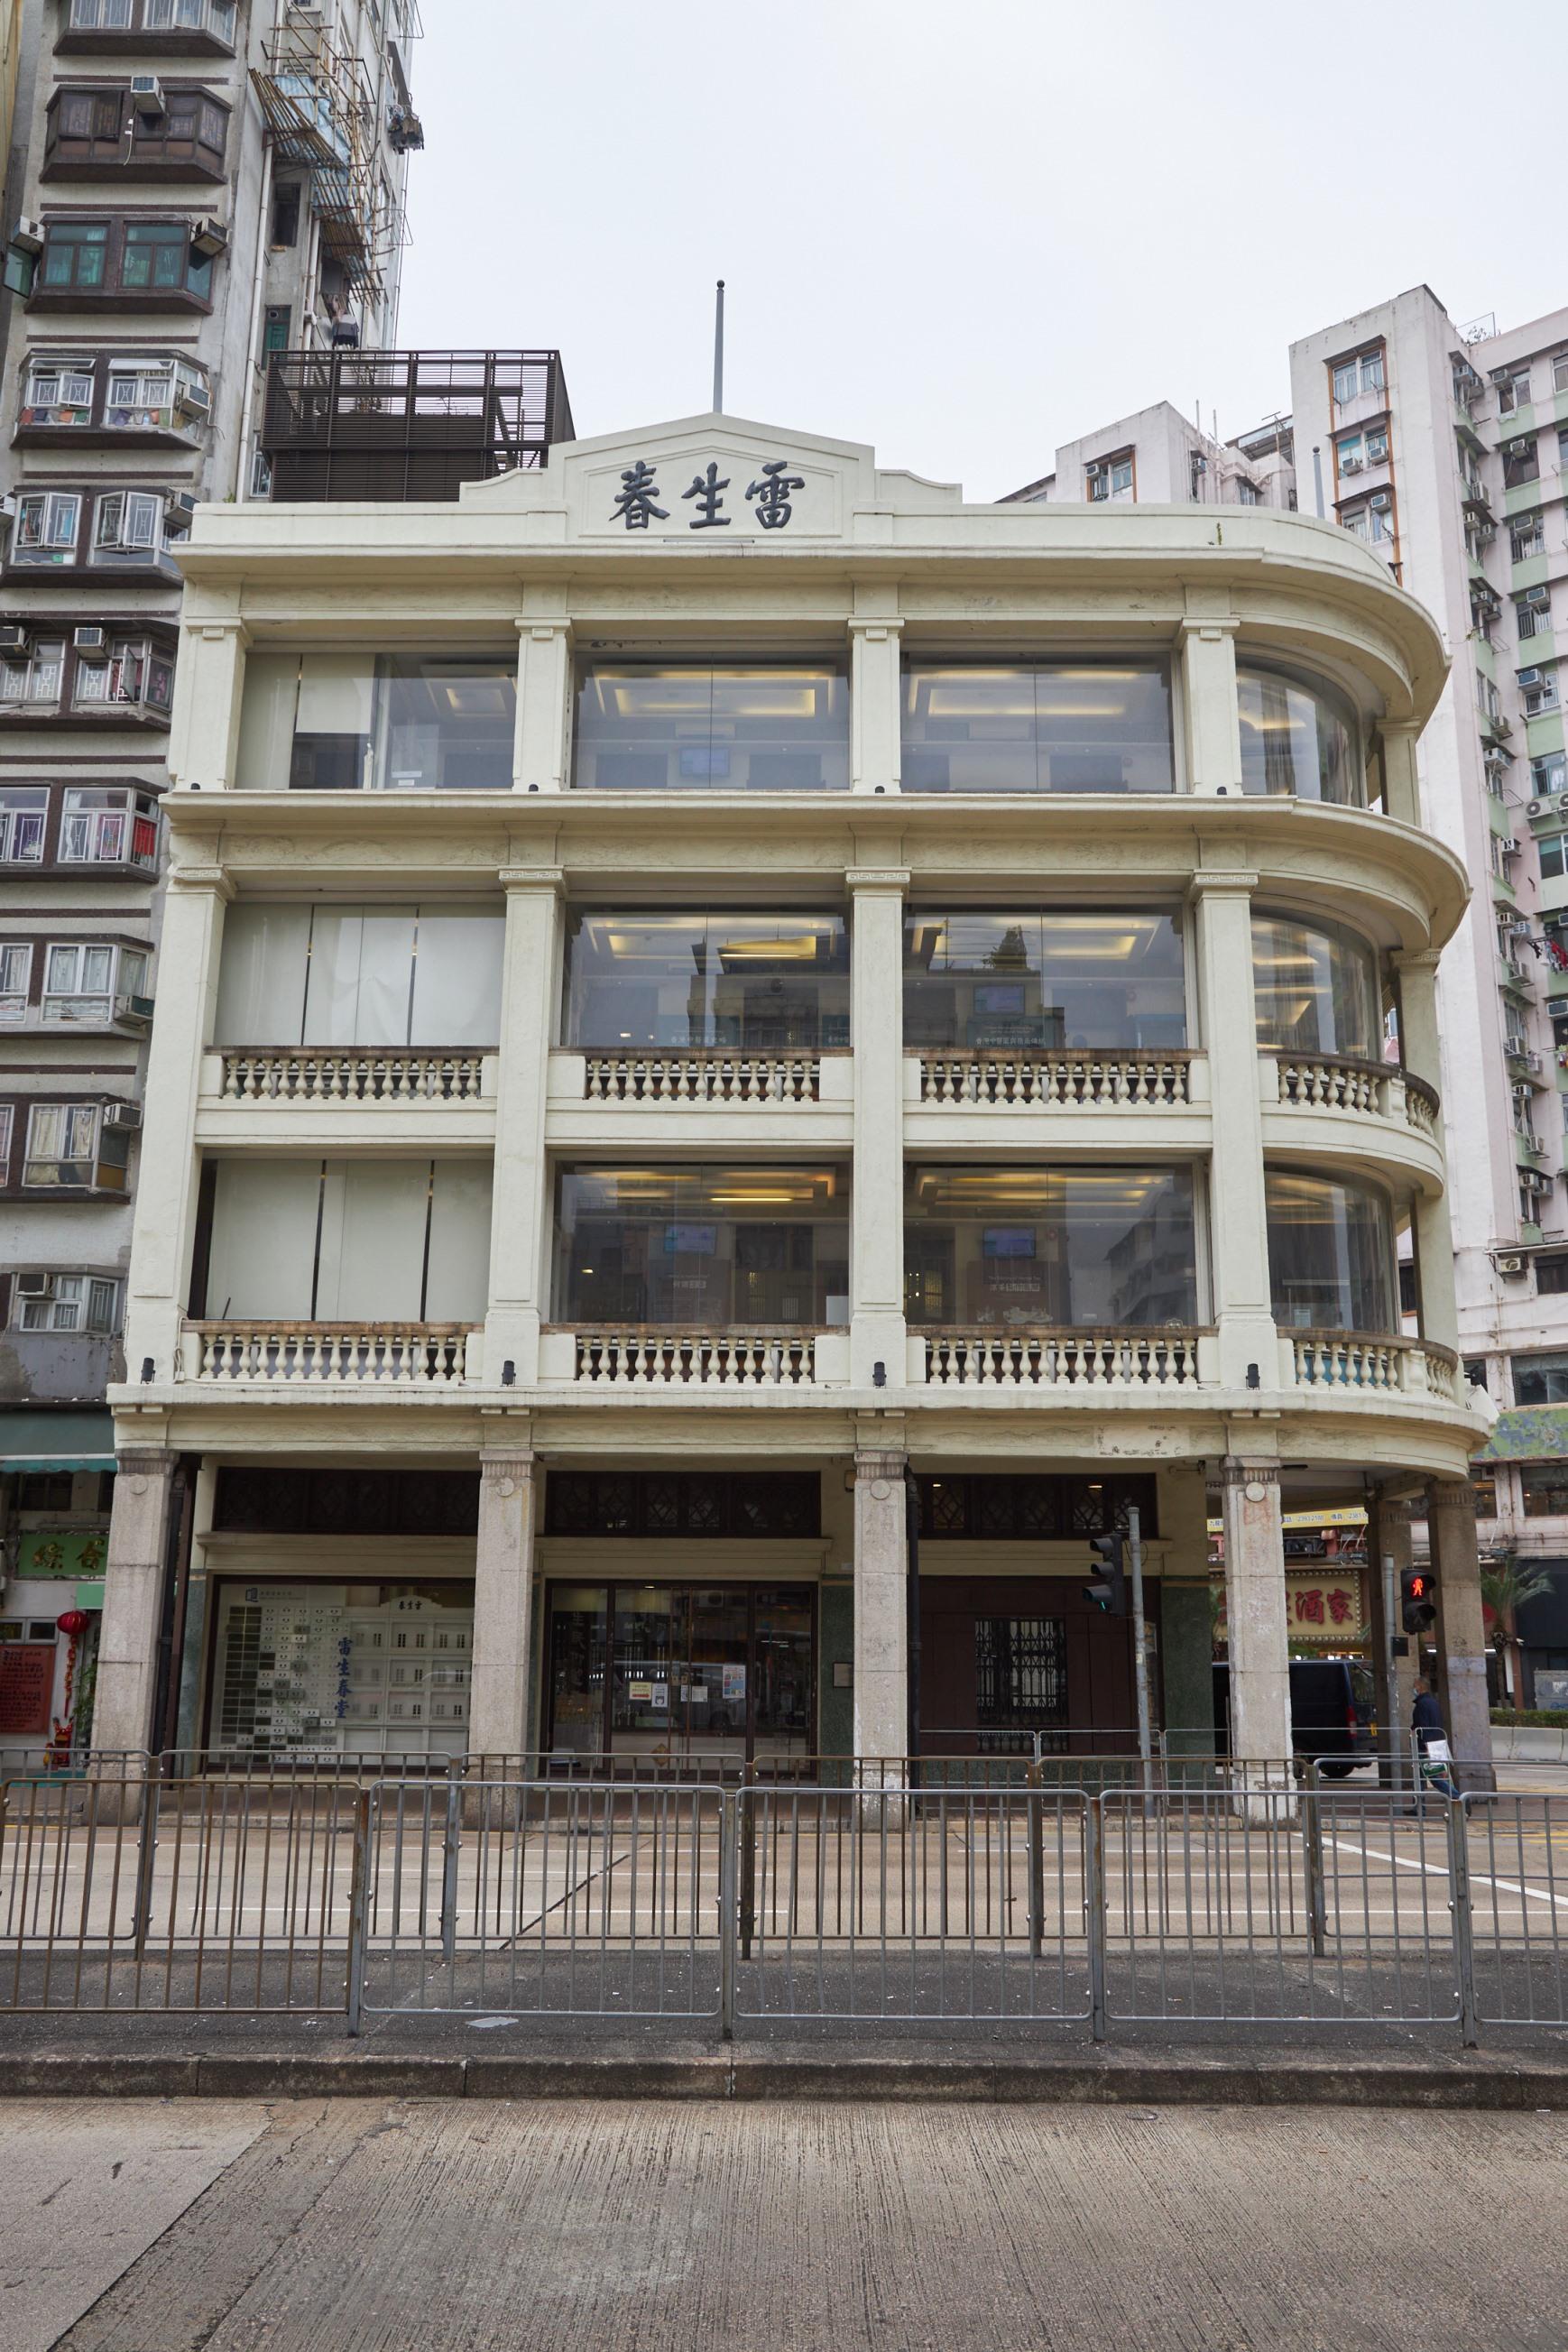 The Government today (May 20) gazetted a notice announcing that the Antiquities Authority (i.e. the Secretary for Development) has declared Jamia Mosque and Hong Kong City Hall in Central, and Lui Seng Chun in Mong Kok as monuments under the Antiquities and Monuments Ordinance. Photo shows the elevation of Lui Seng Chun facing Lai Chi Kok Road. The building has rectangular frames and rows of decorative balustrades.